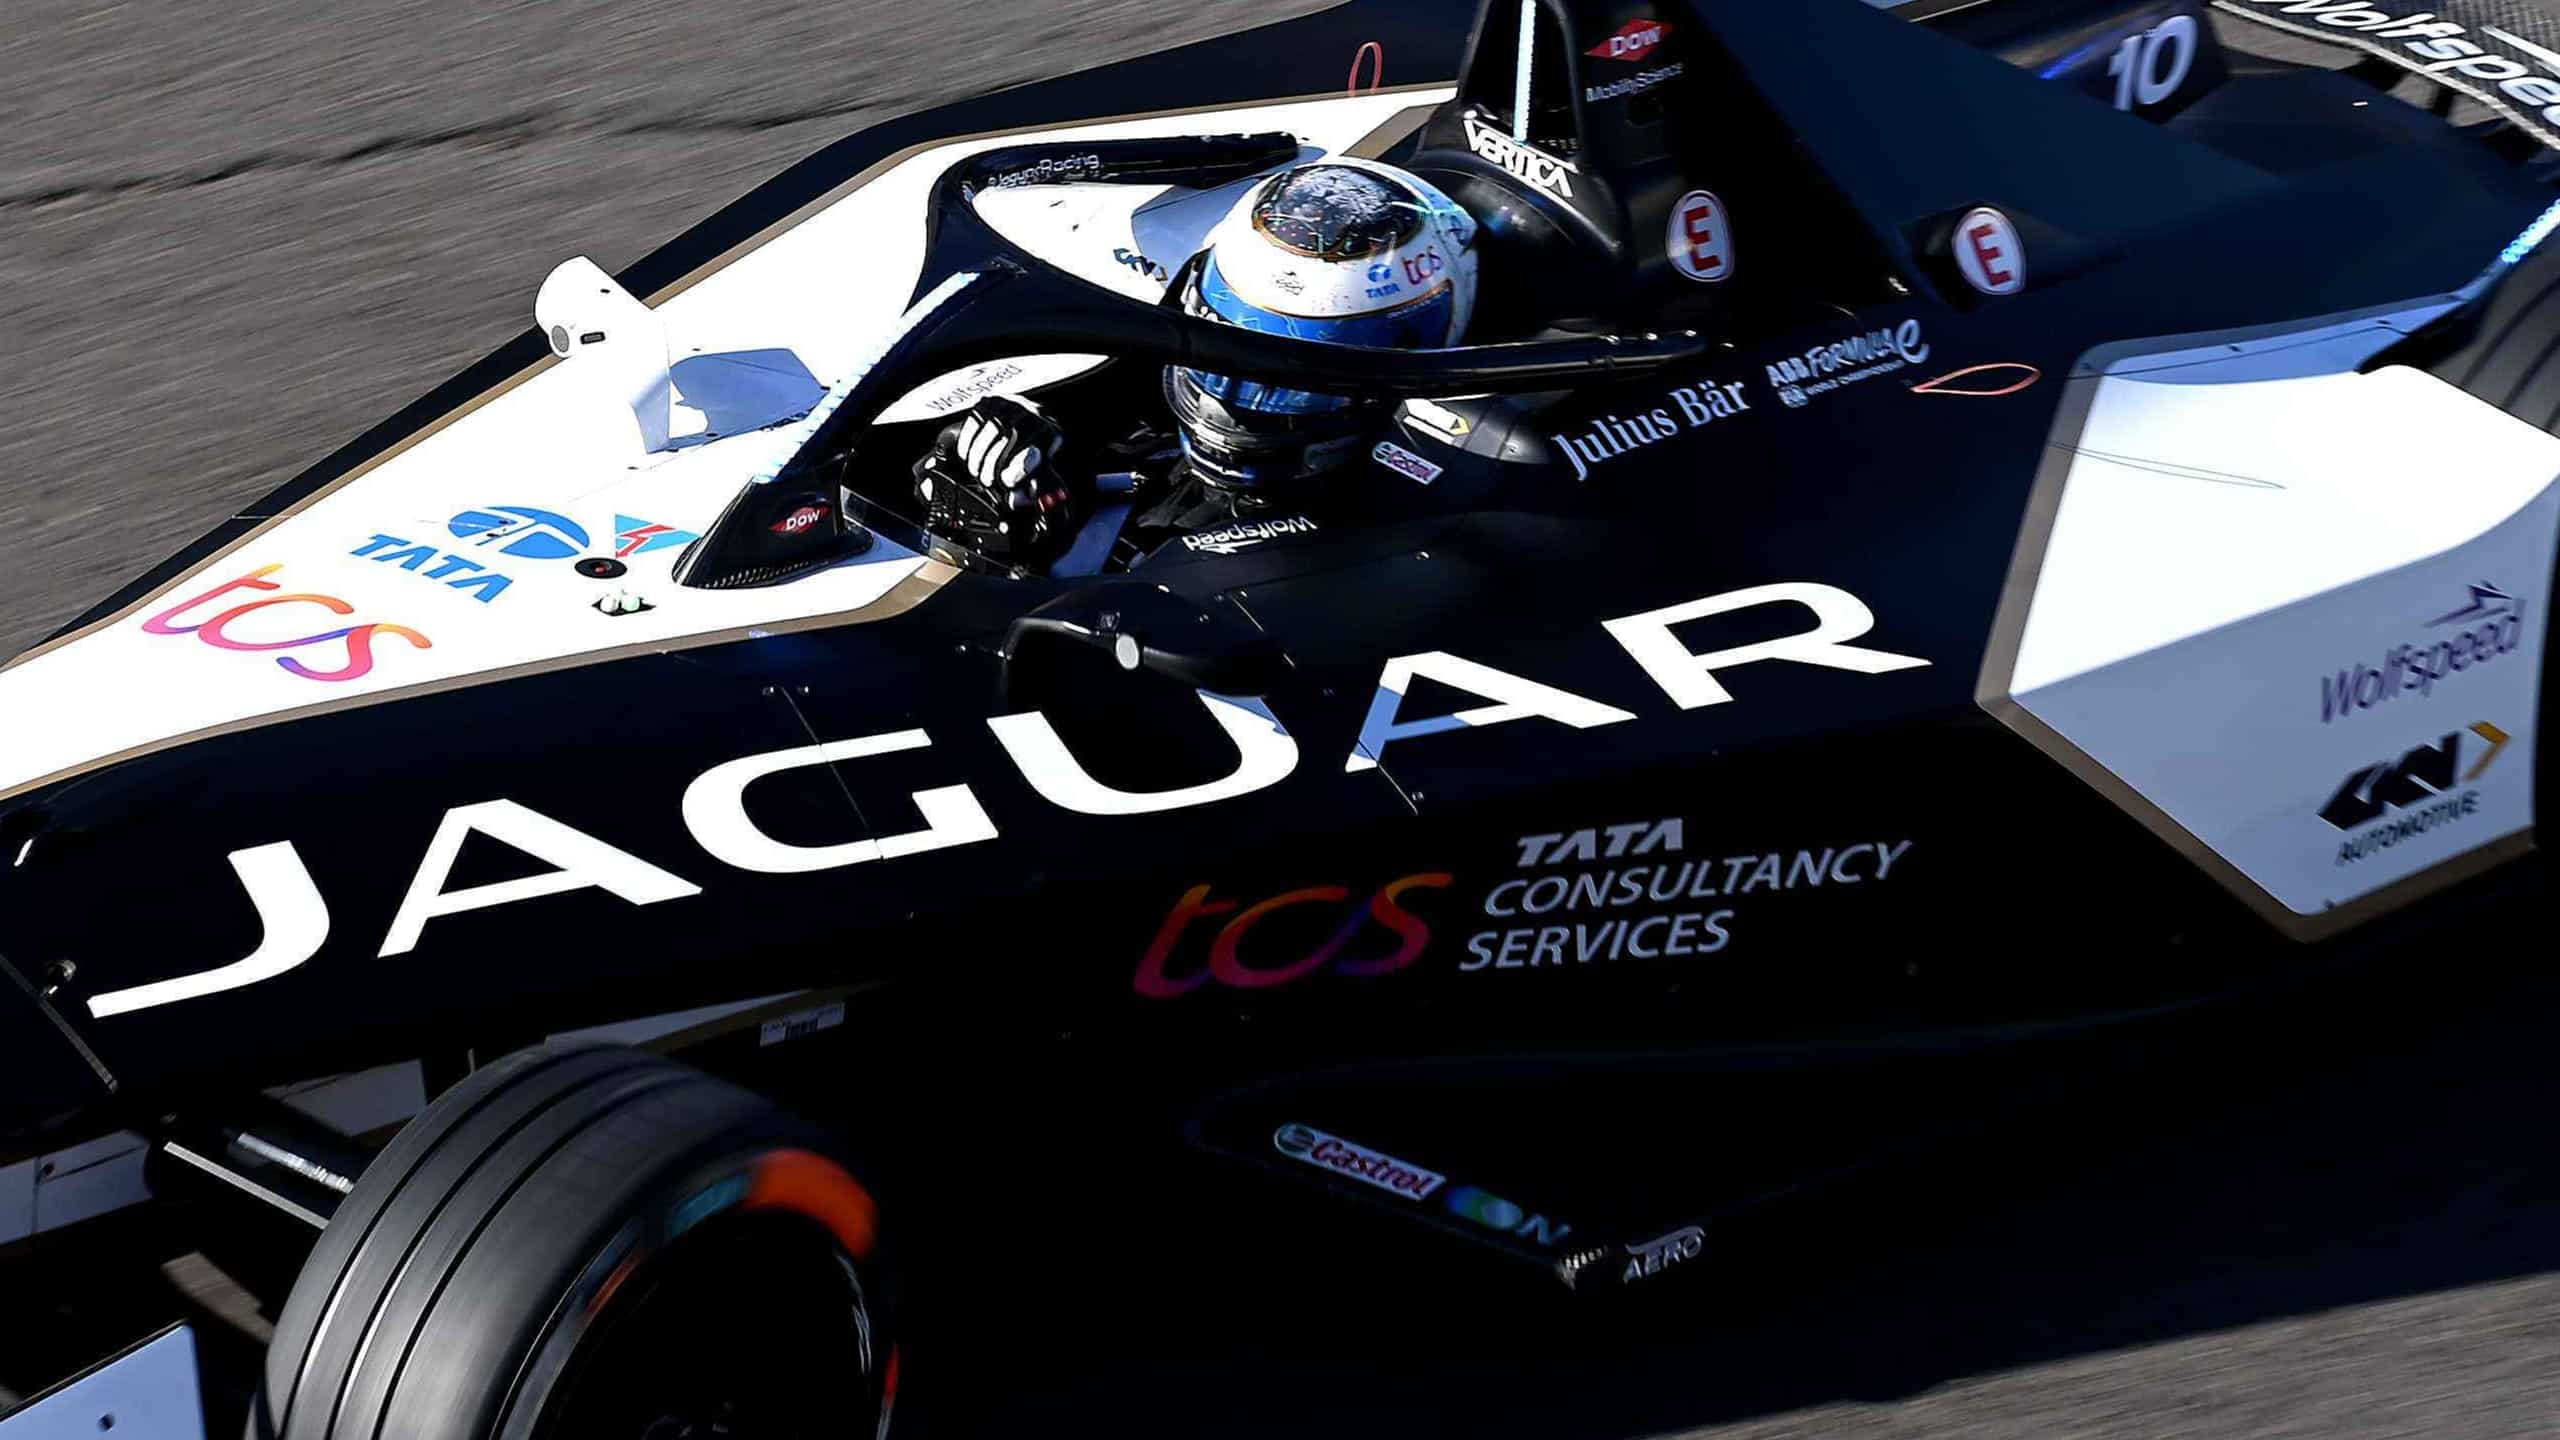 Jaguar TCS team is about to start the Formula E